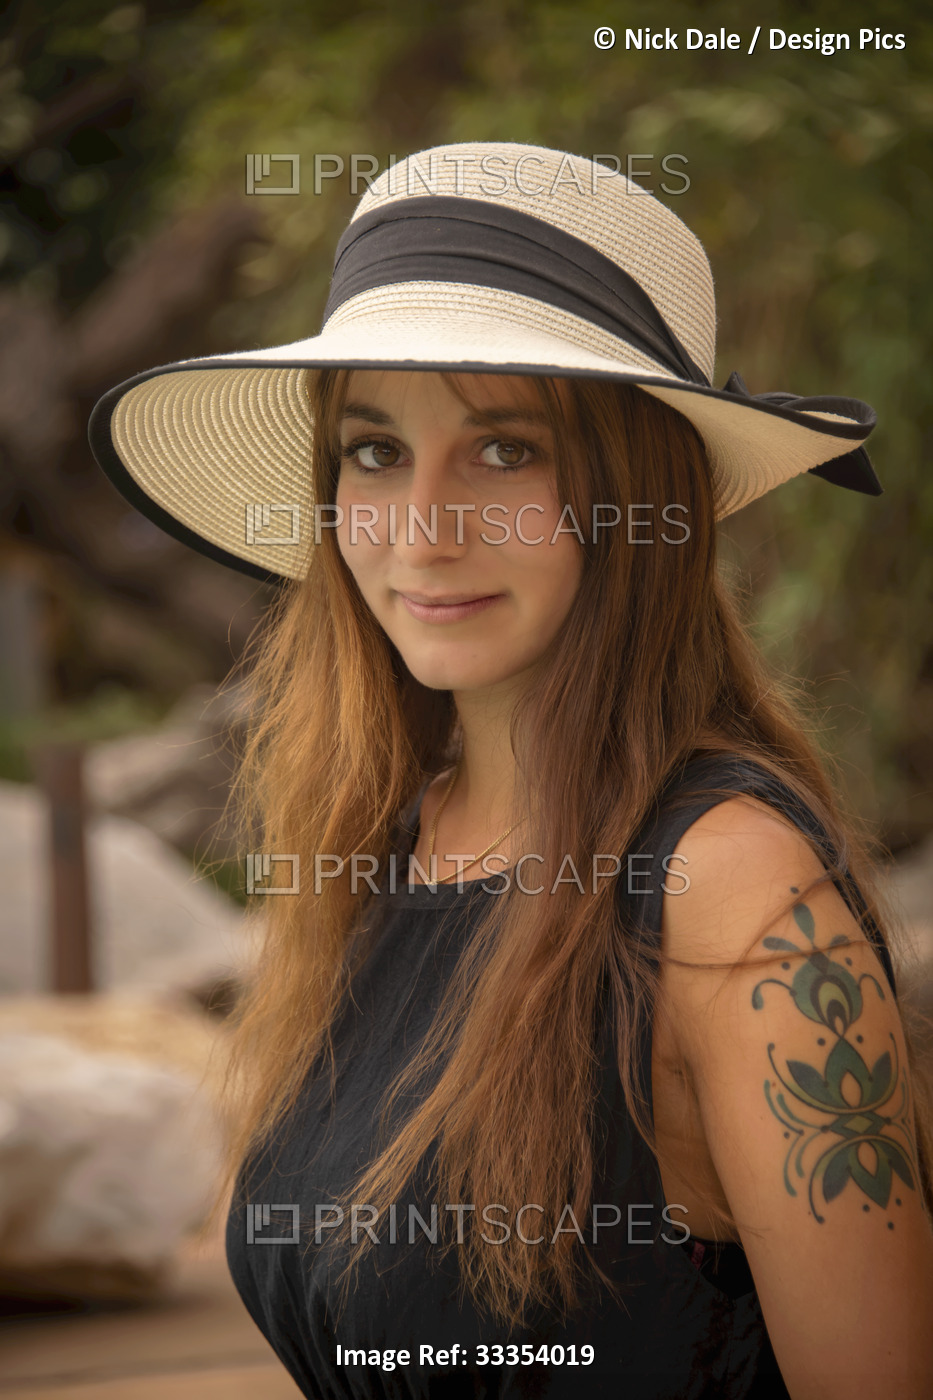 Close-up portrait of woman with a tattoo on her arm wearing a straw hat and ...